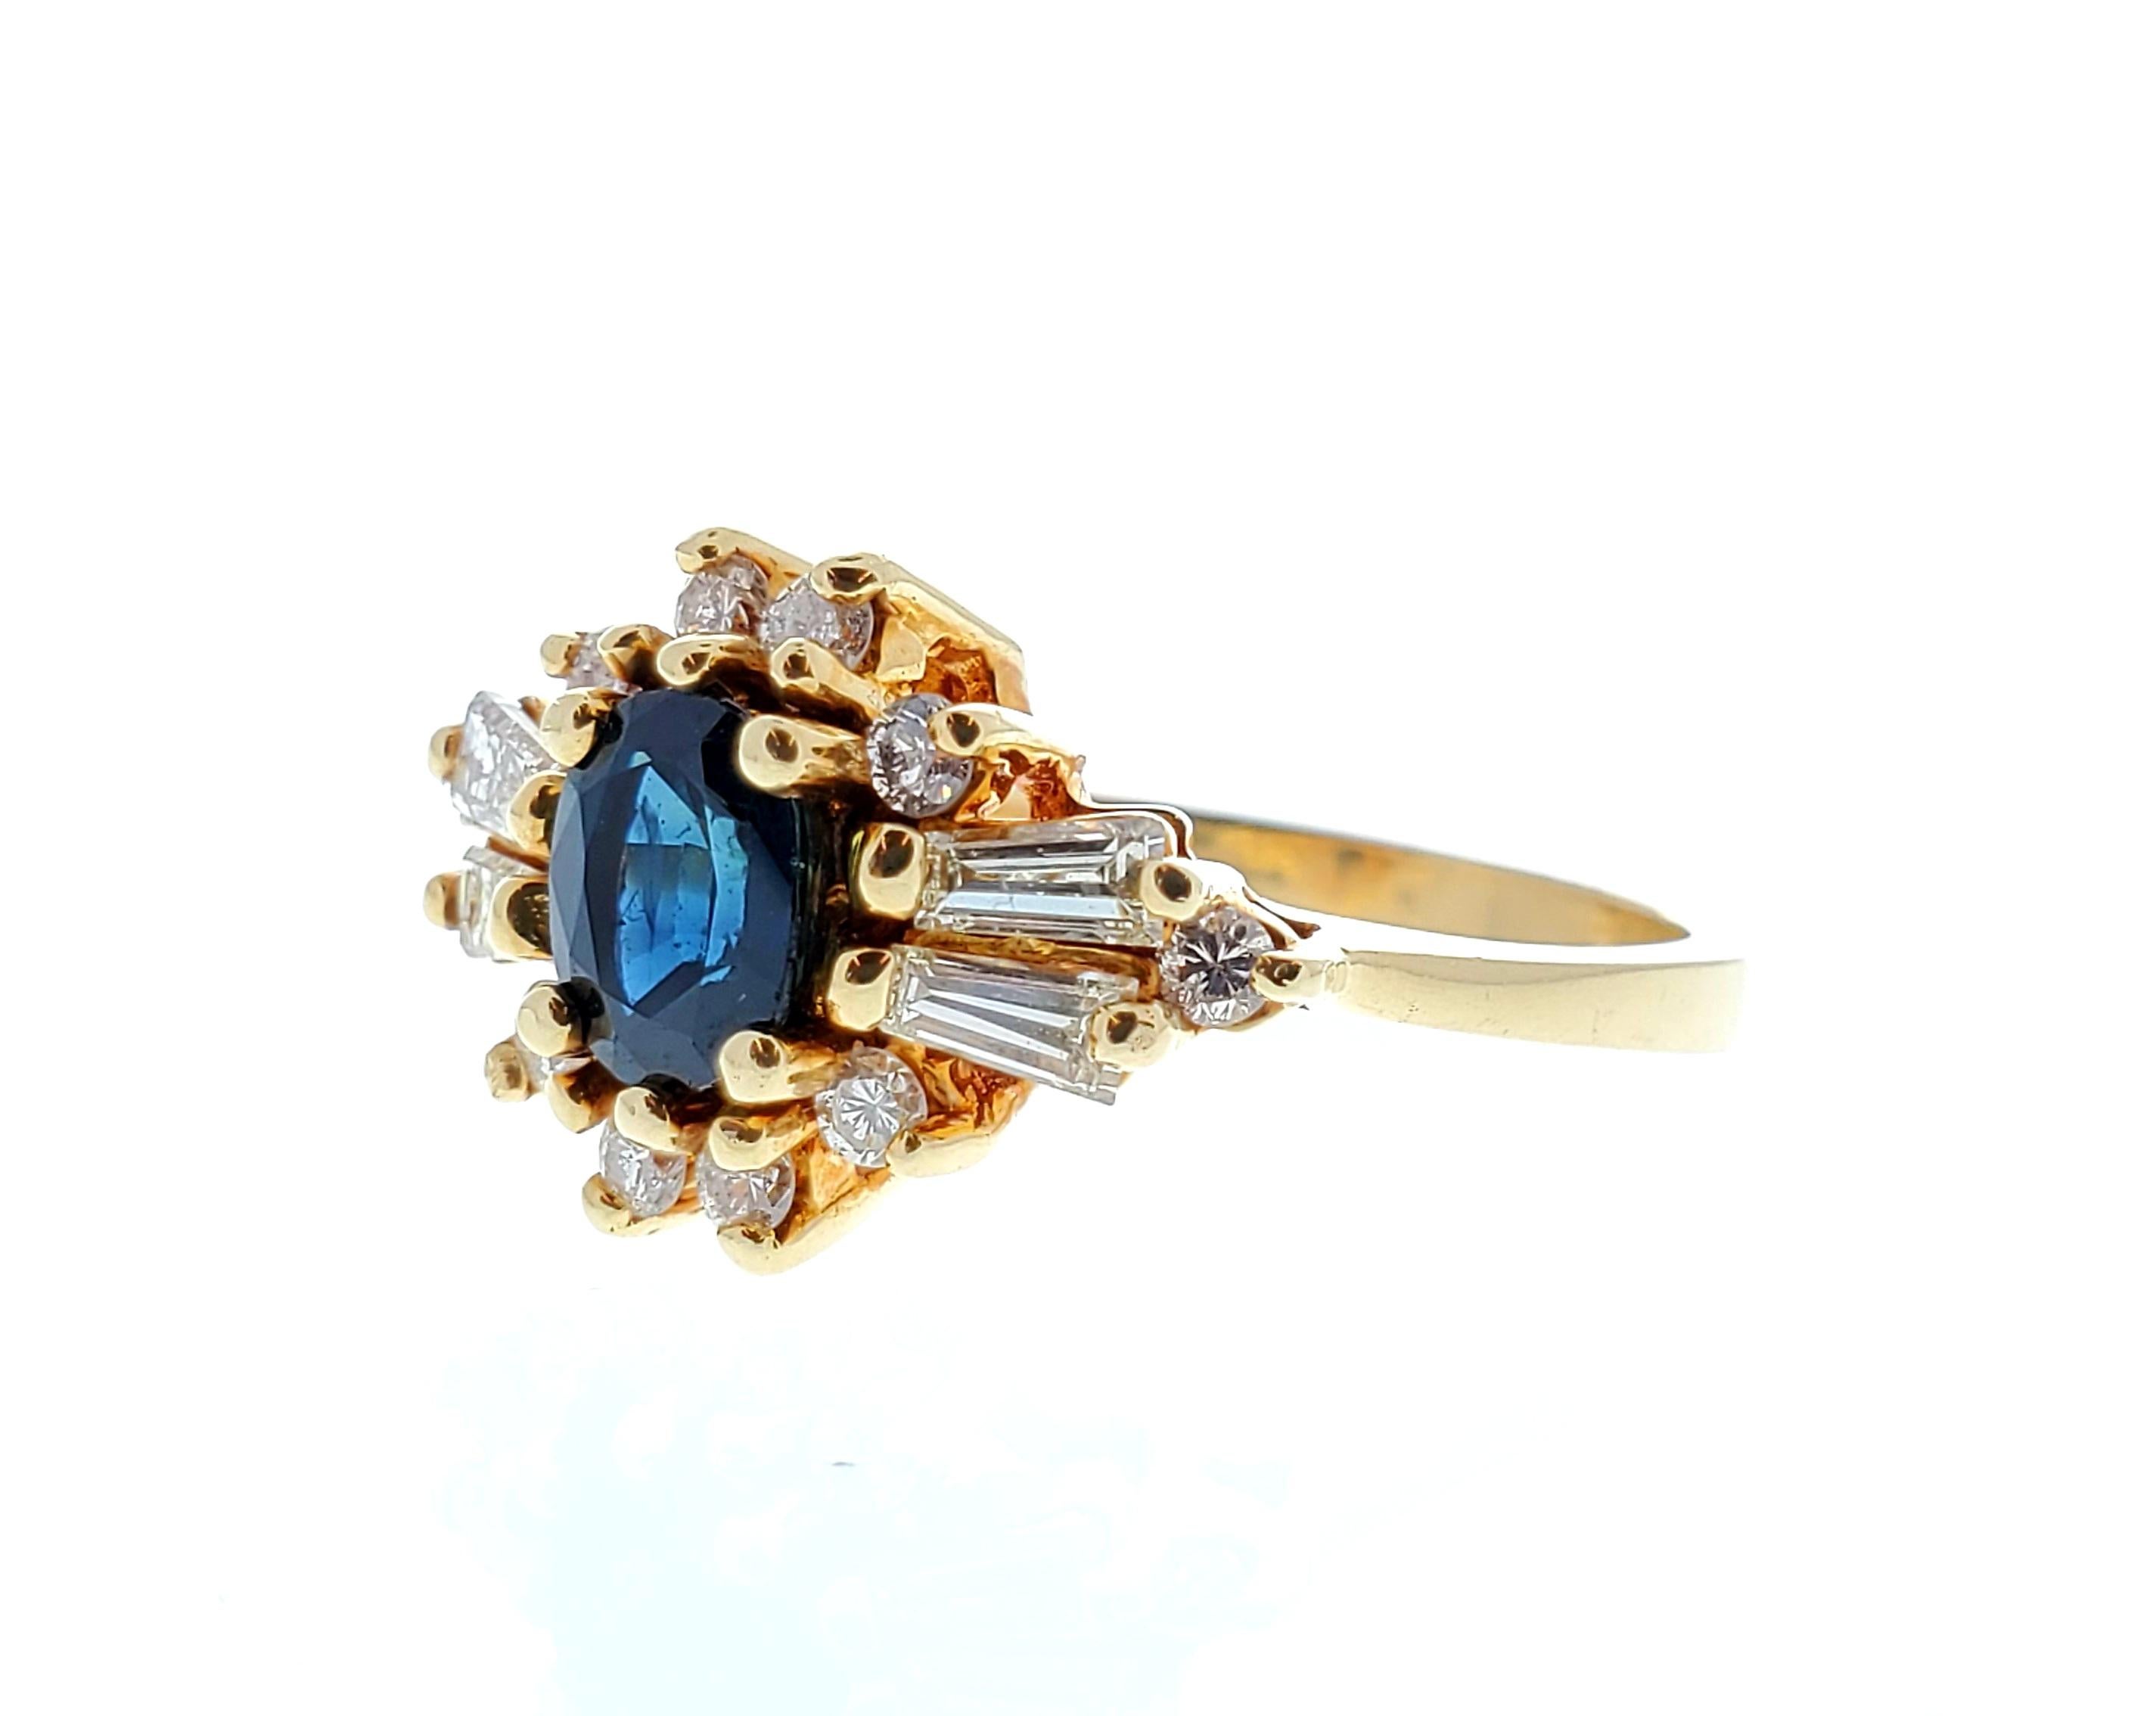 Contemporary 1.00 Carat Oval Sapphire and Diamond Vintage Ring in 14 Karat Yellow Gold